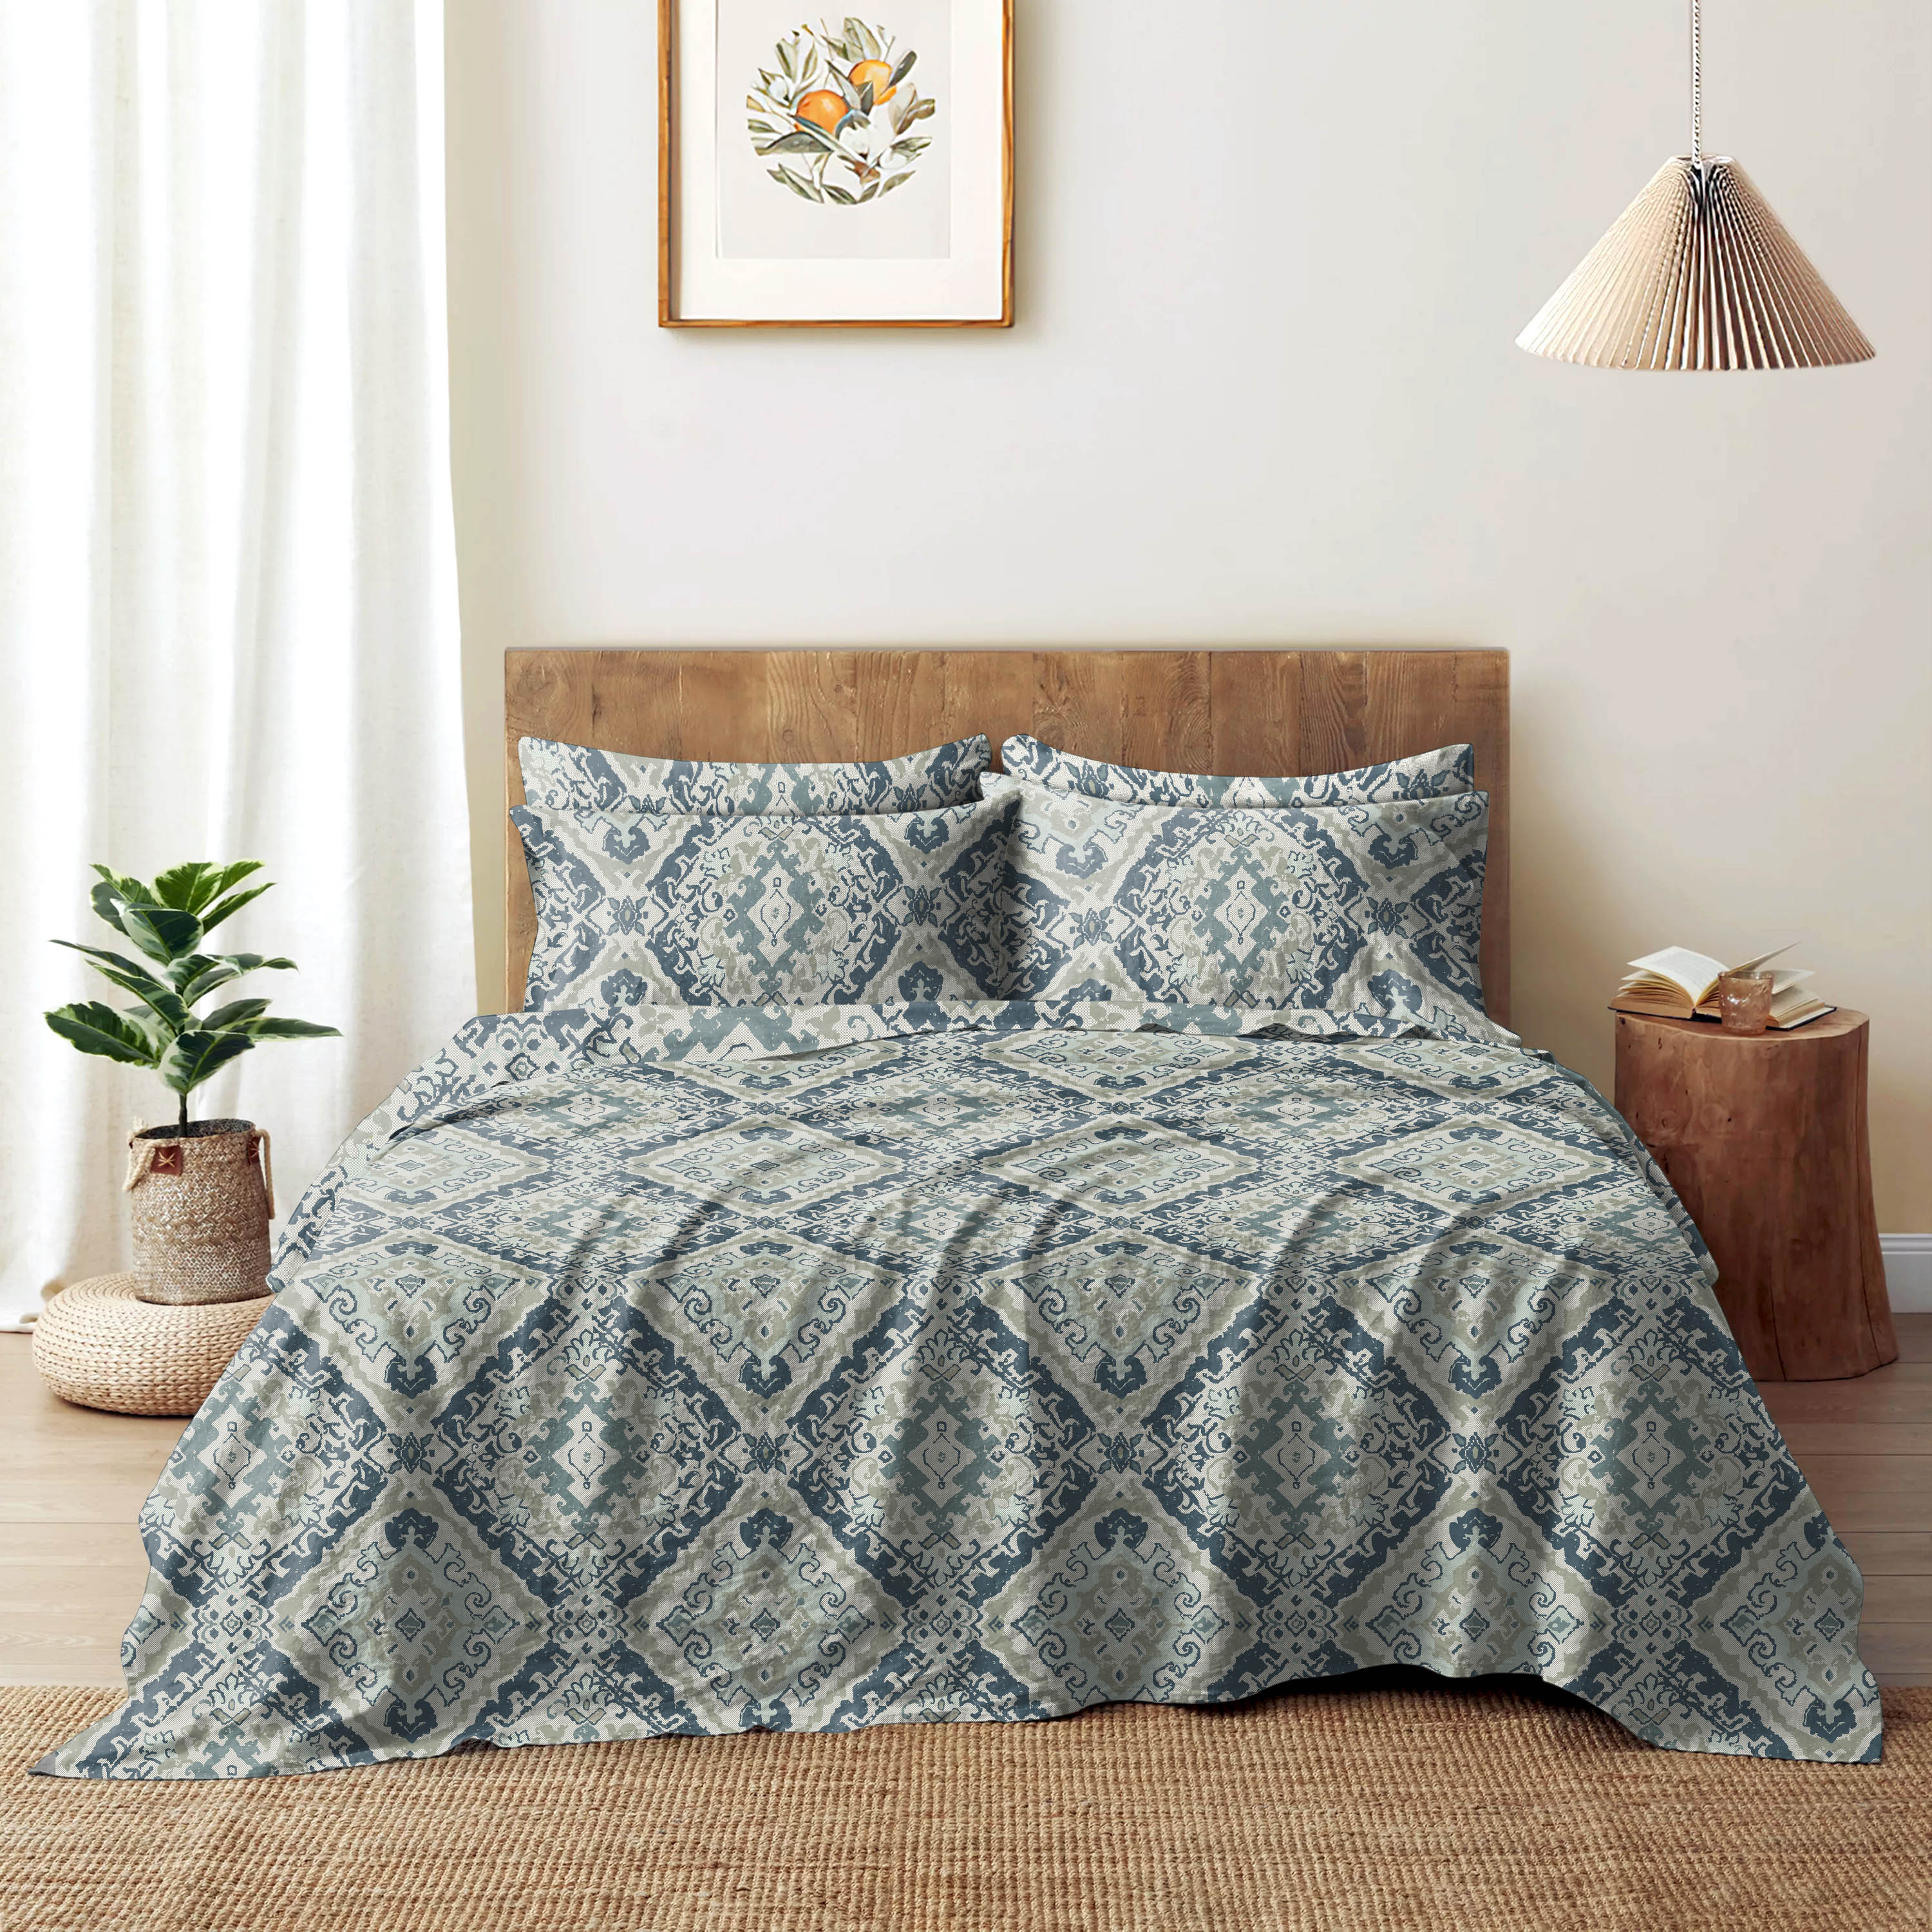 MOROCCO INDIGO BEDSHEET FOR DOUBLE BED WITH 2 PILLOWCOVERS  SIZE (104" X 90")